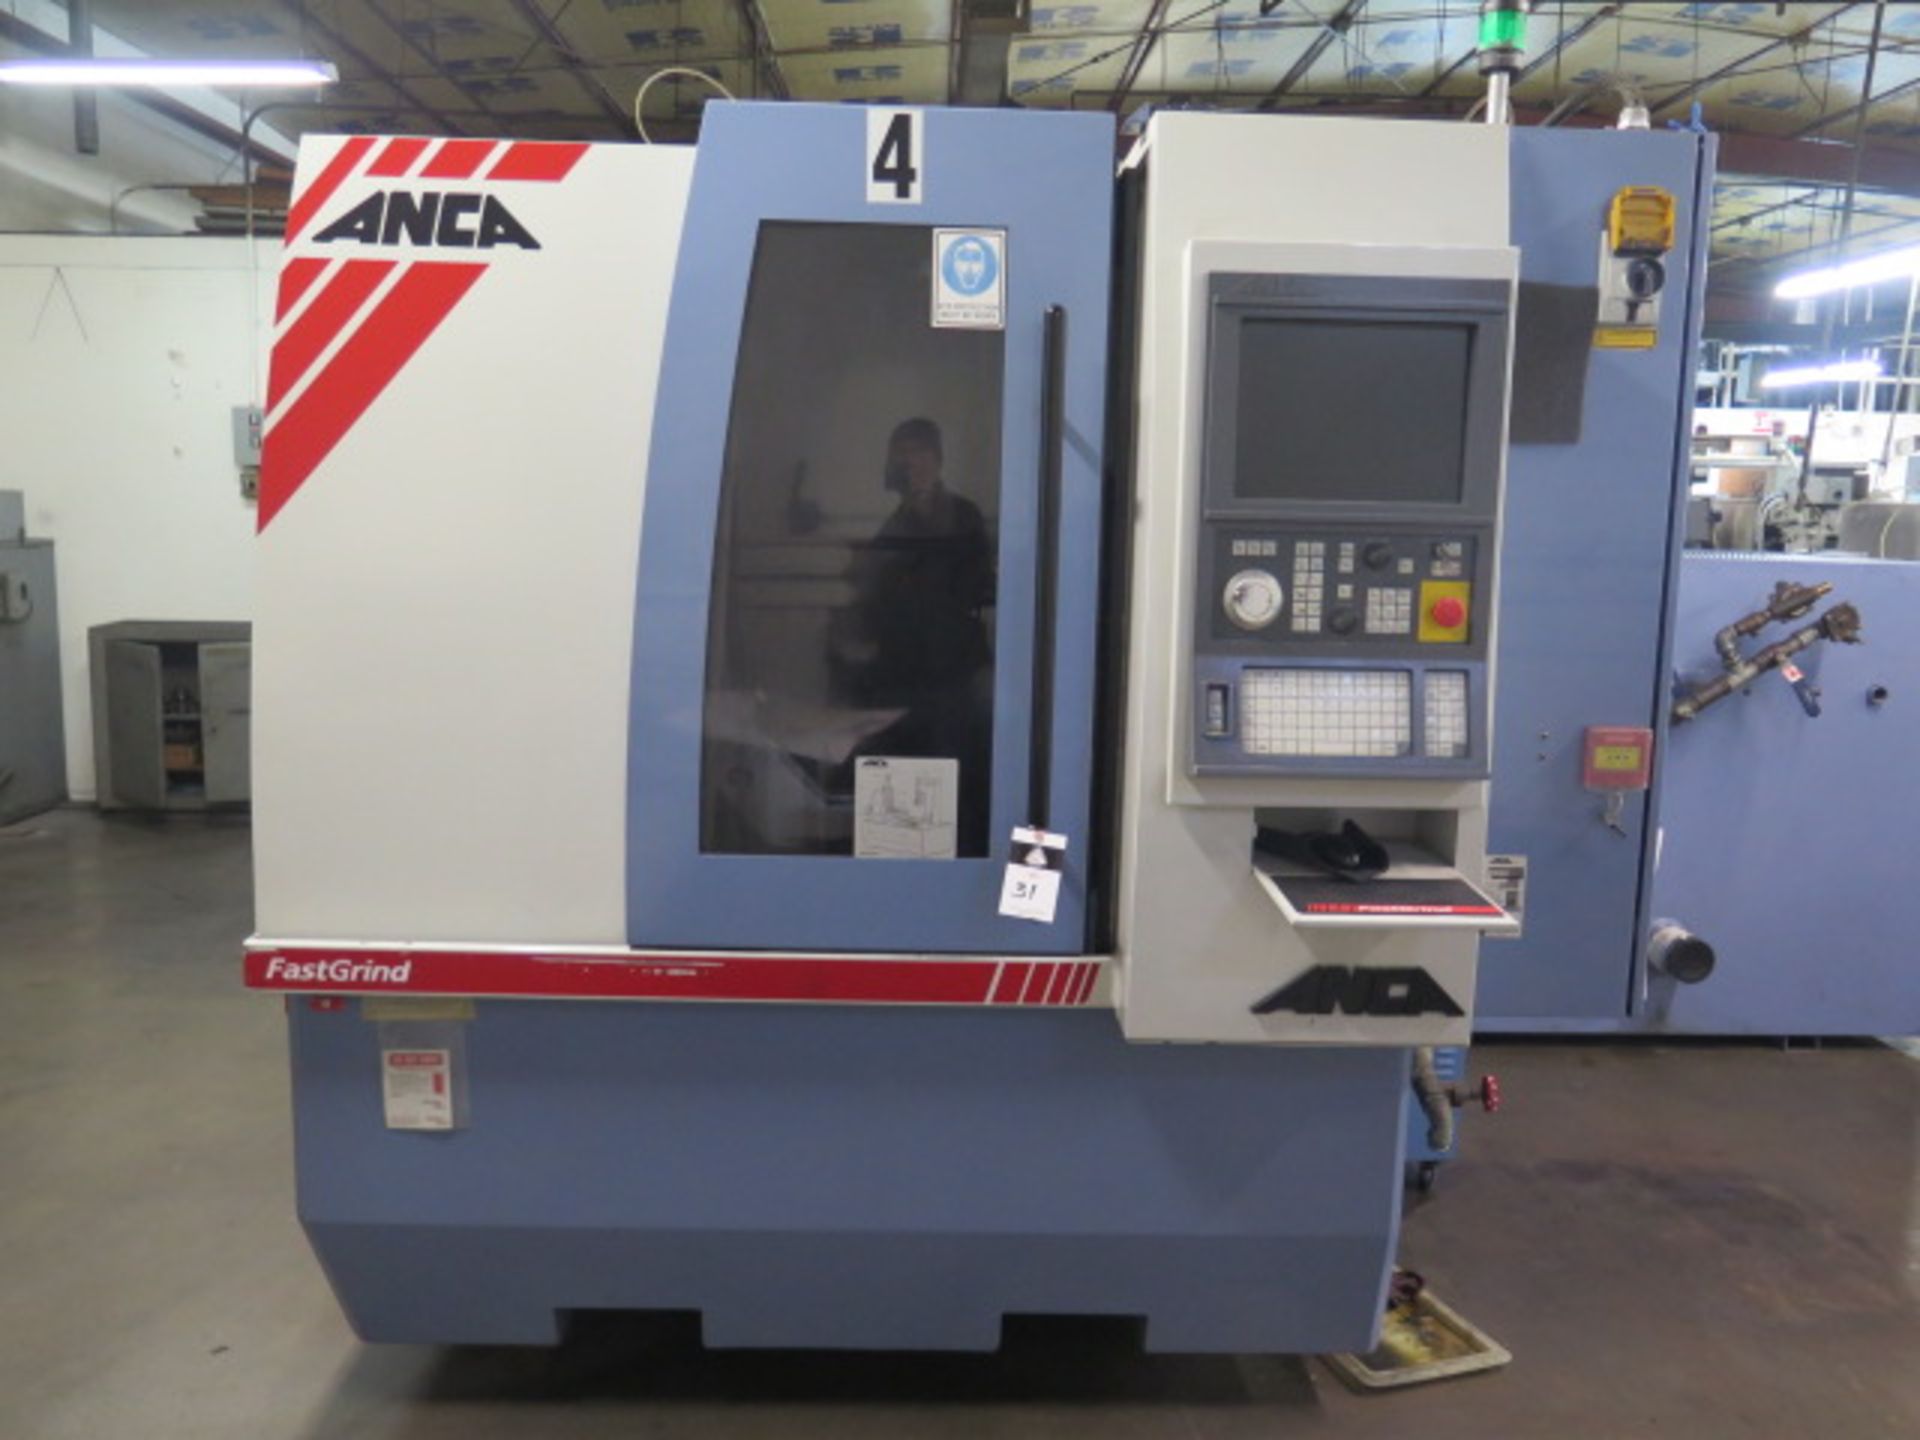 2012 Anca “Fastgrind” 7-Axis CNC Tool and Cutter Grinder s/n 750431 w/ Anca PC Controls, SOLD AS IS